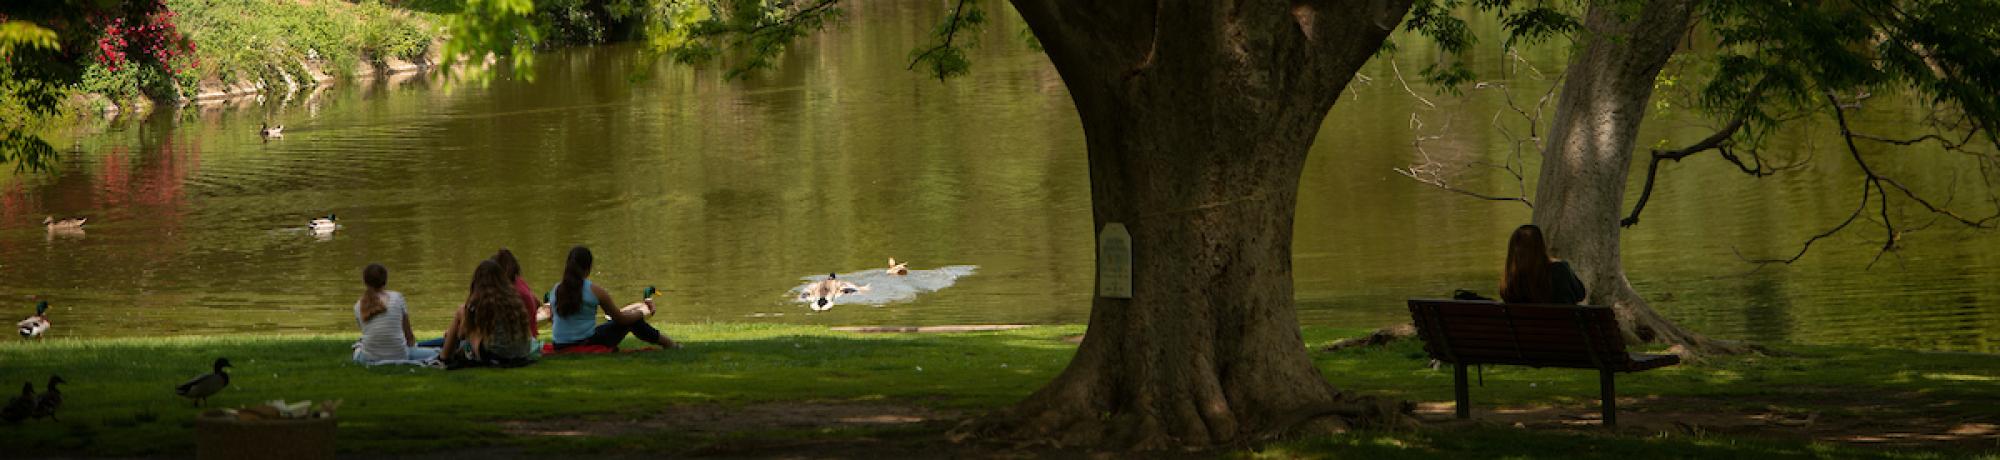 Students relax in the shade of a large tree by Lake Spafford in the Arboretum as ducks swim in the lake on May 1, 2018.  The spring weather is warm for students to study on the grass